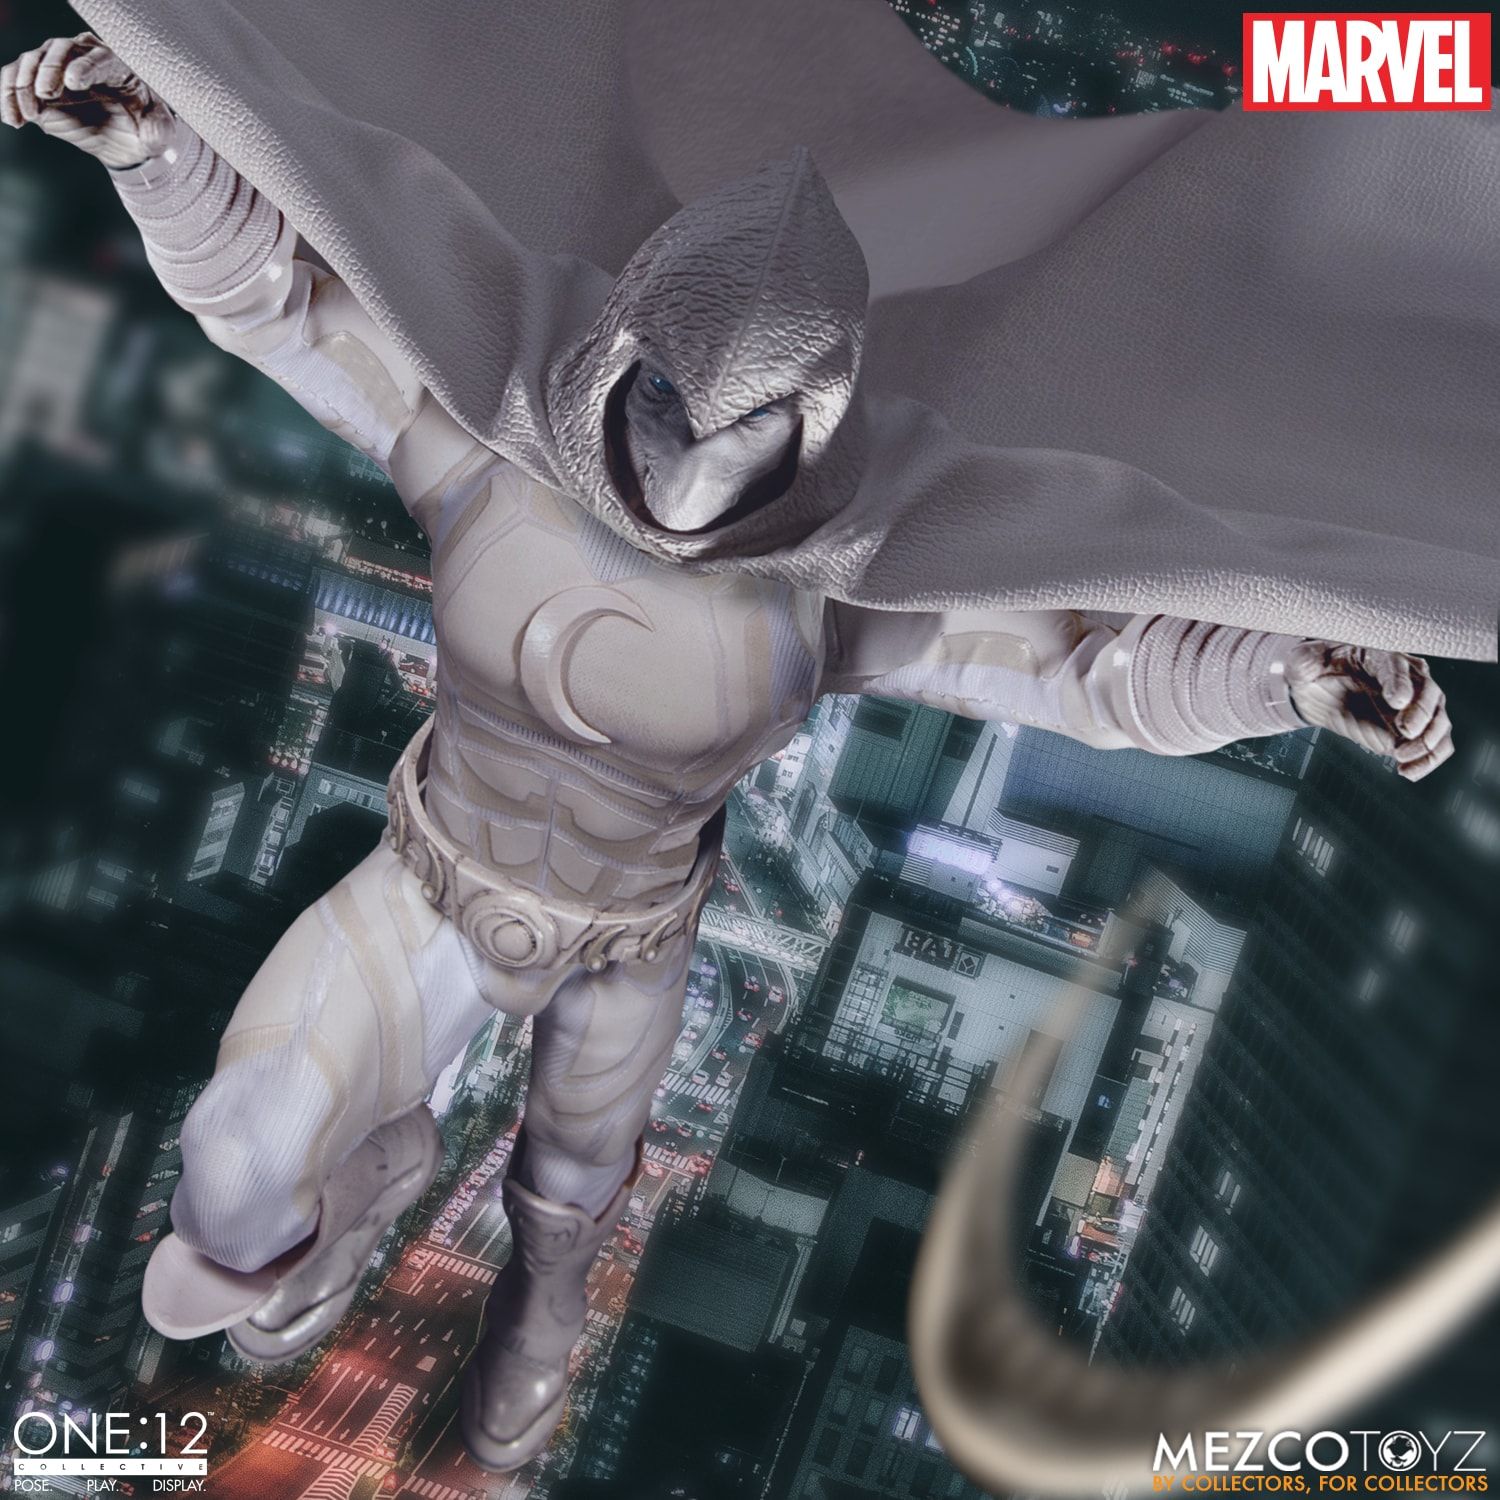 MARVEL LEGENDS SERIES MOON KNIGHT EXCLUSIVE 6" ACTION FIGURE PRE ORDER